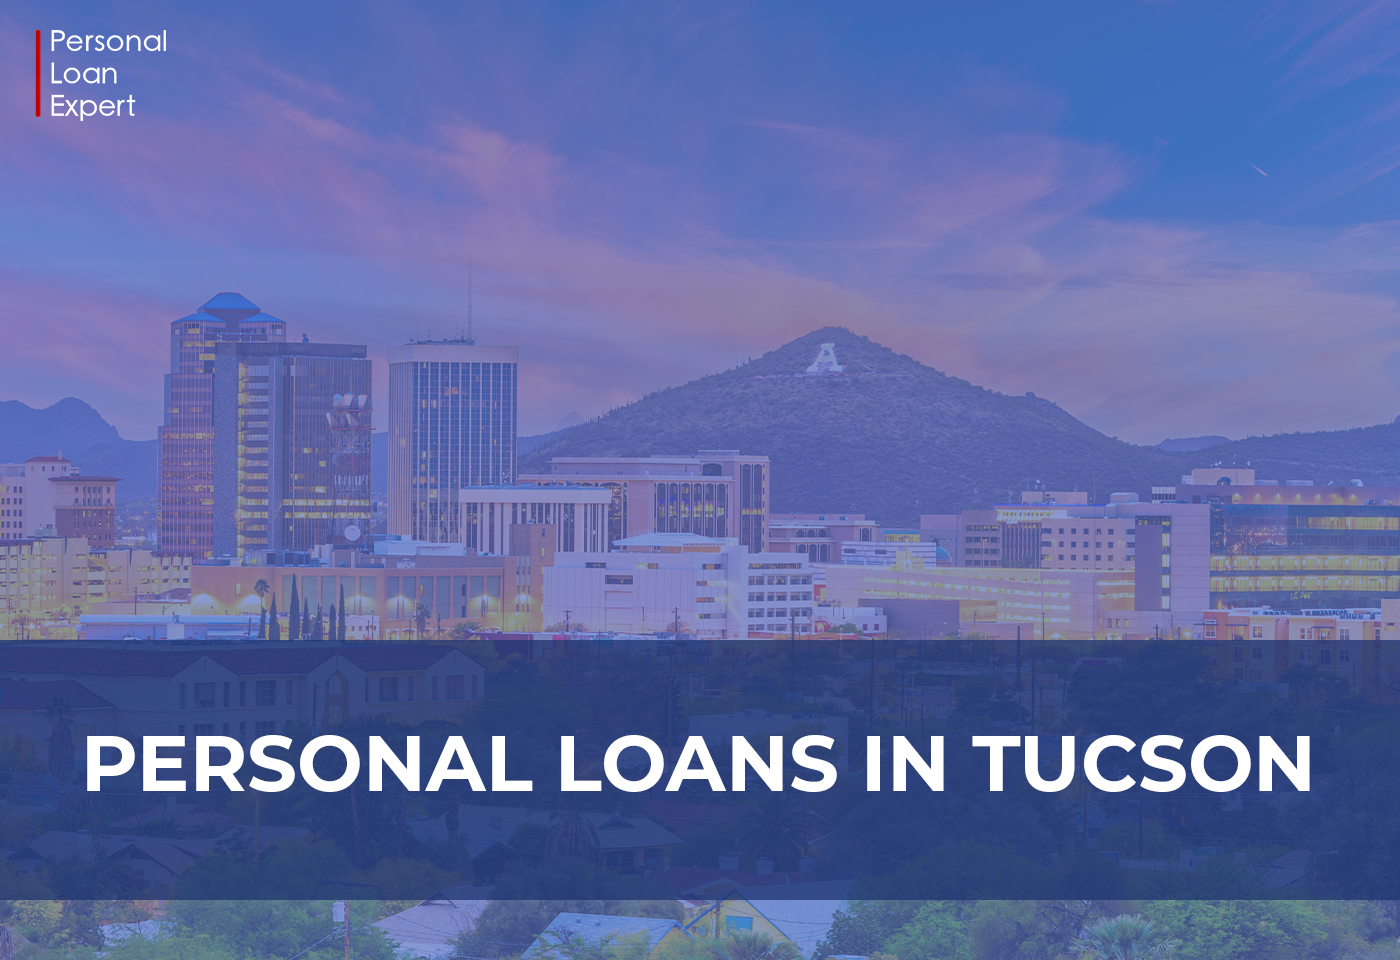 Personal Loans in Tucson